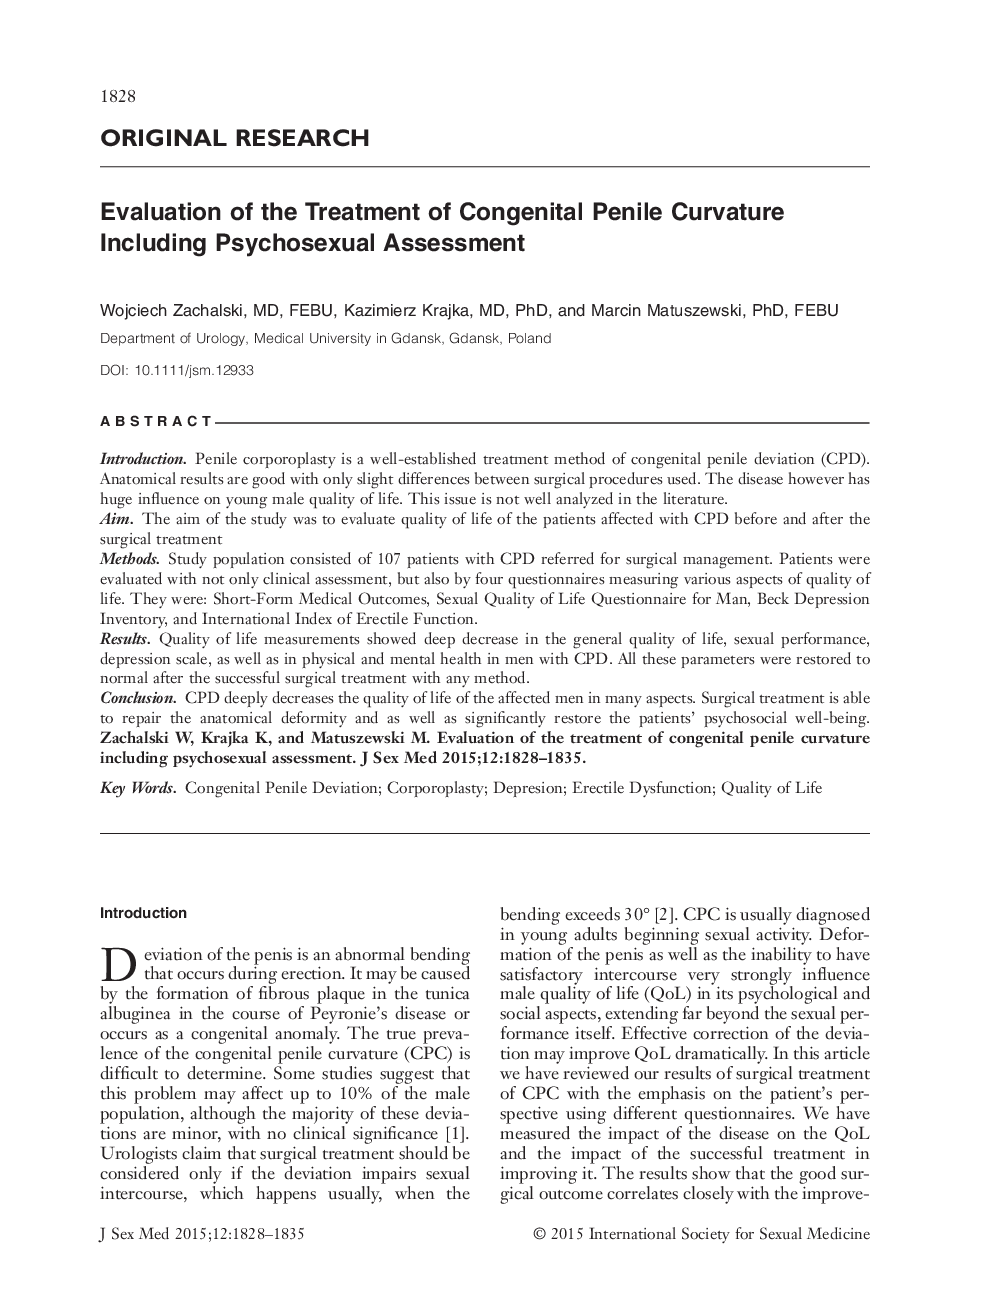 Evaluation of the Treatment of Congenital Penile Curvature Including Psychosexual Assessment